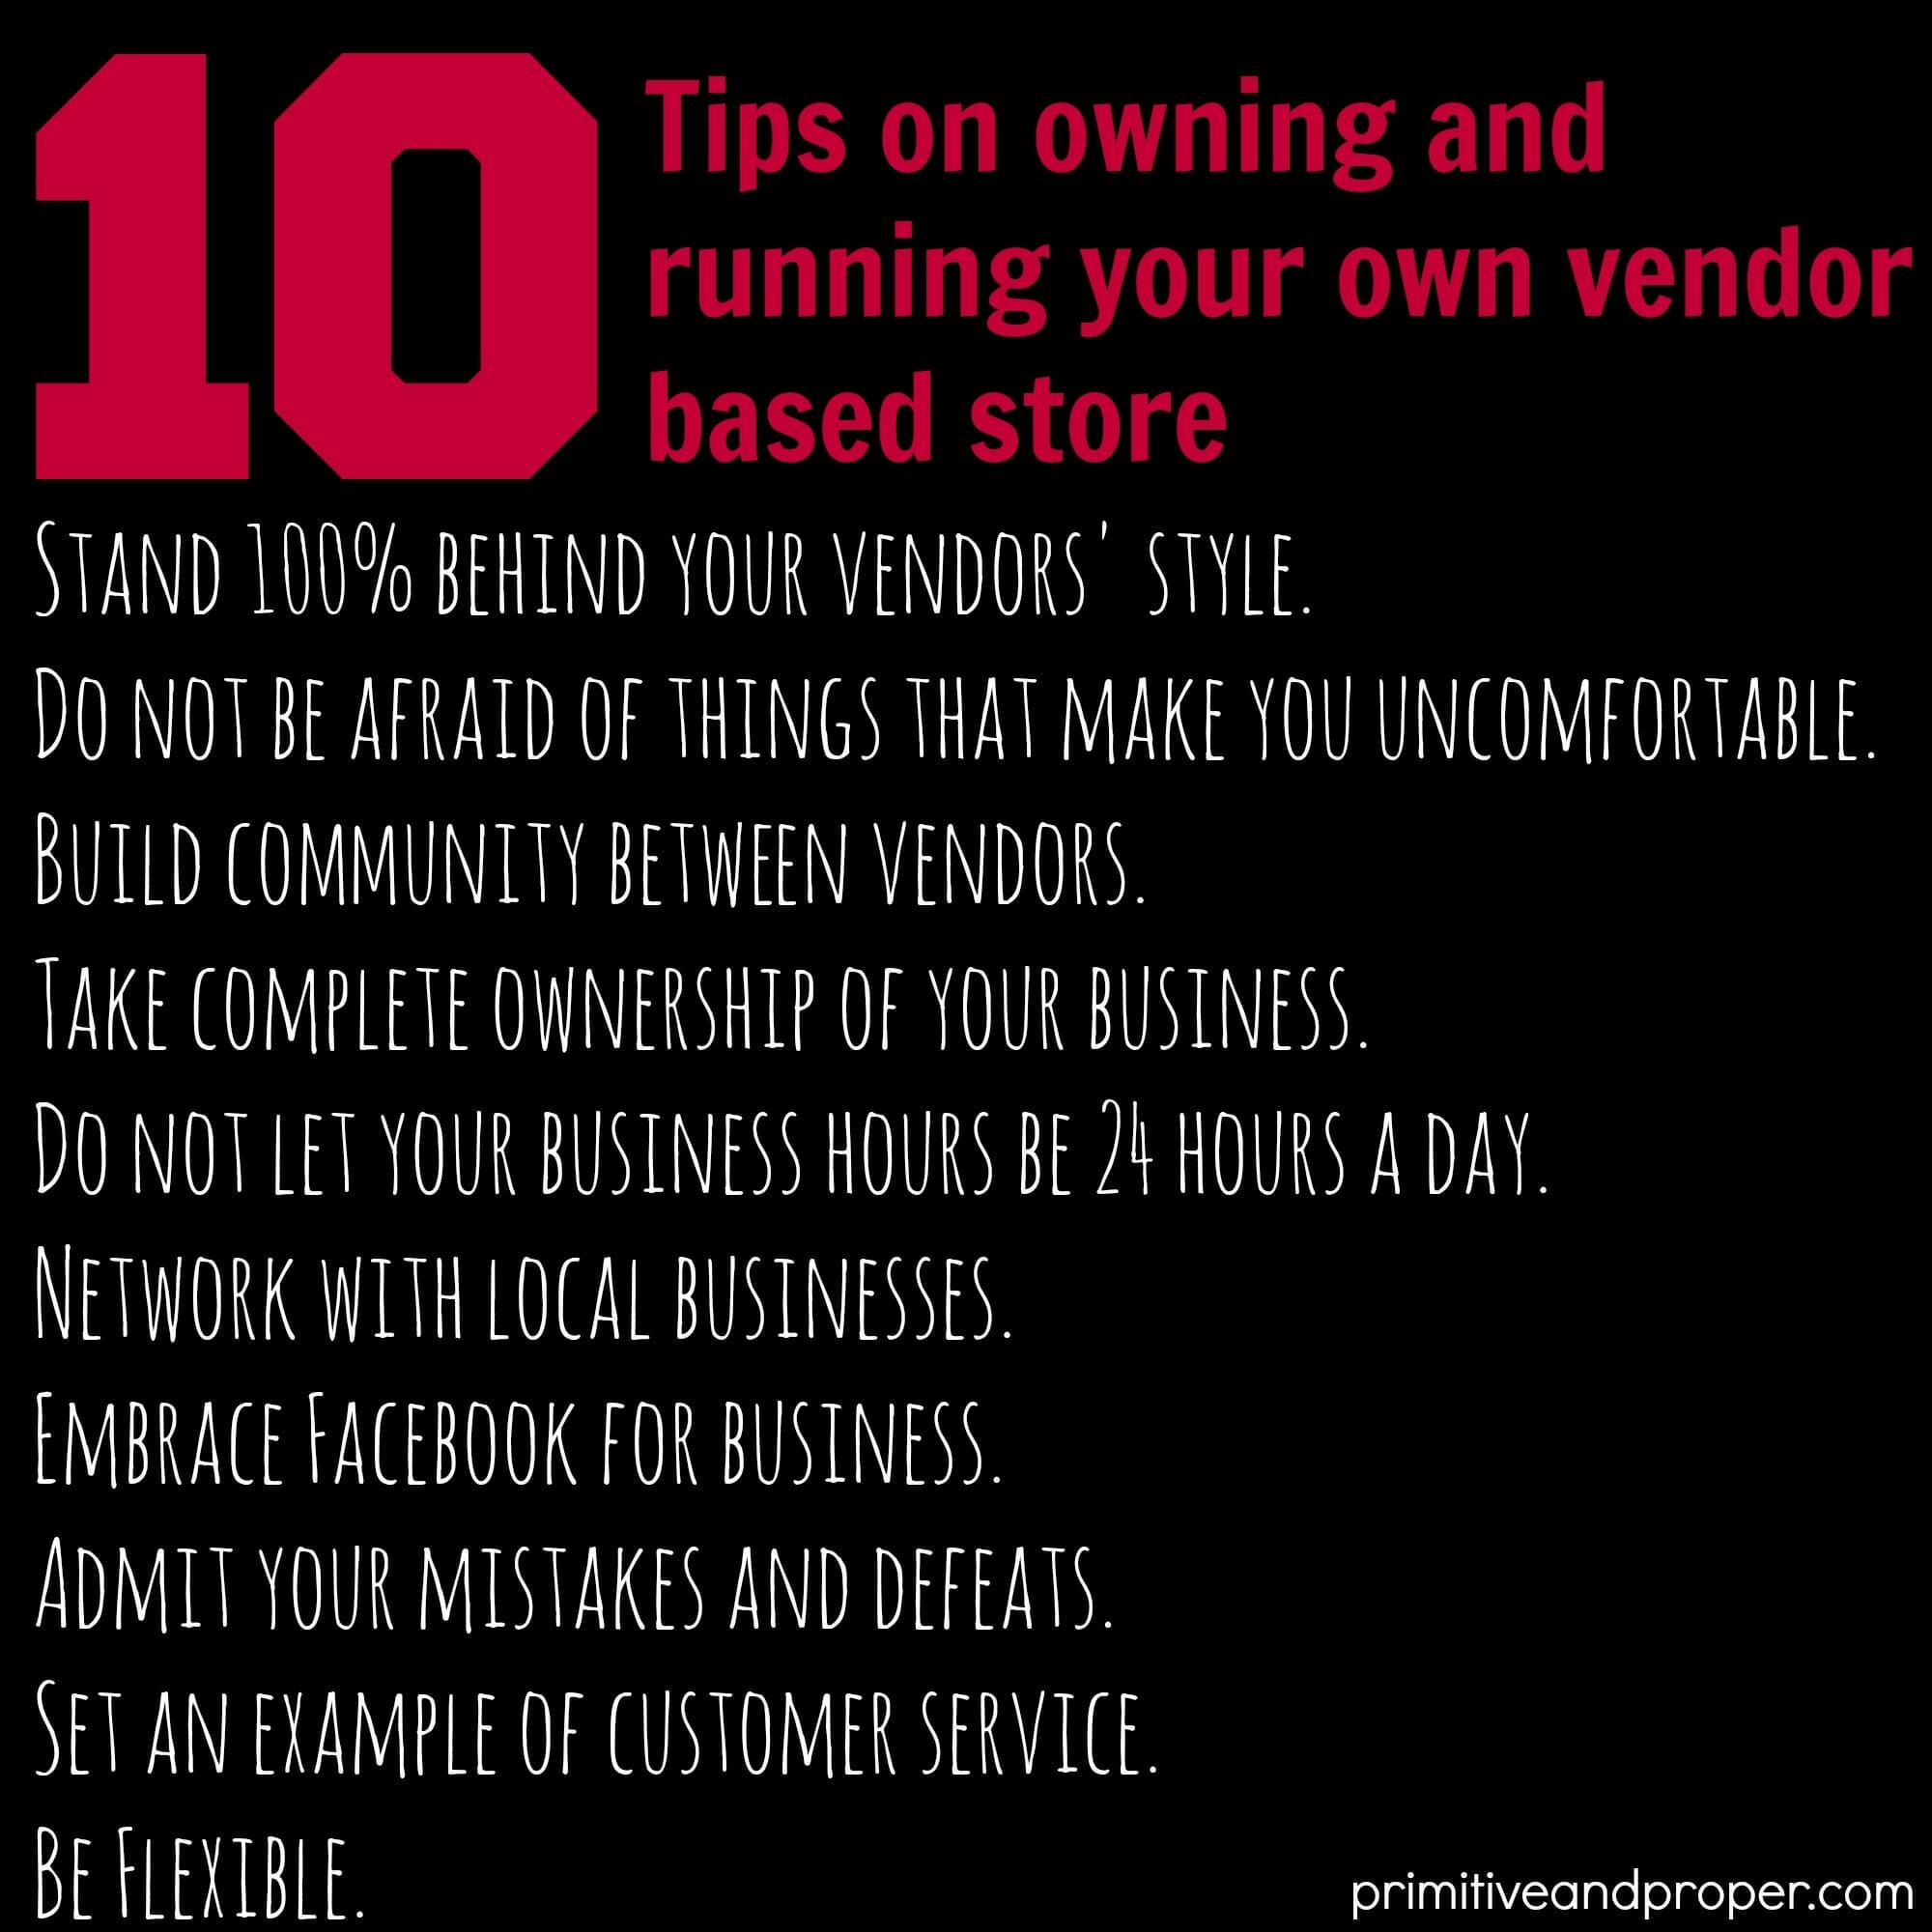 10 Tips on Owning Your Own Vendor Based Store